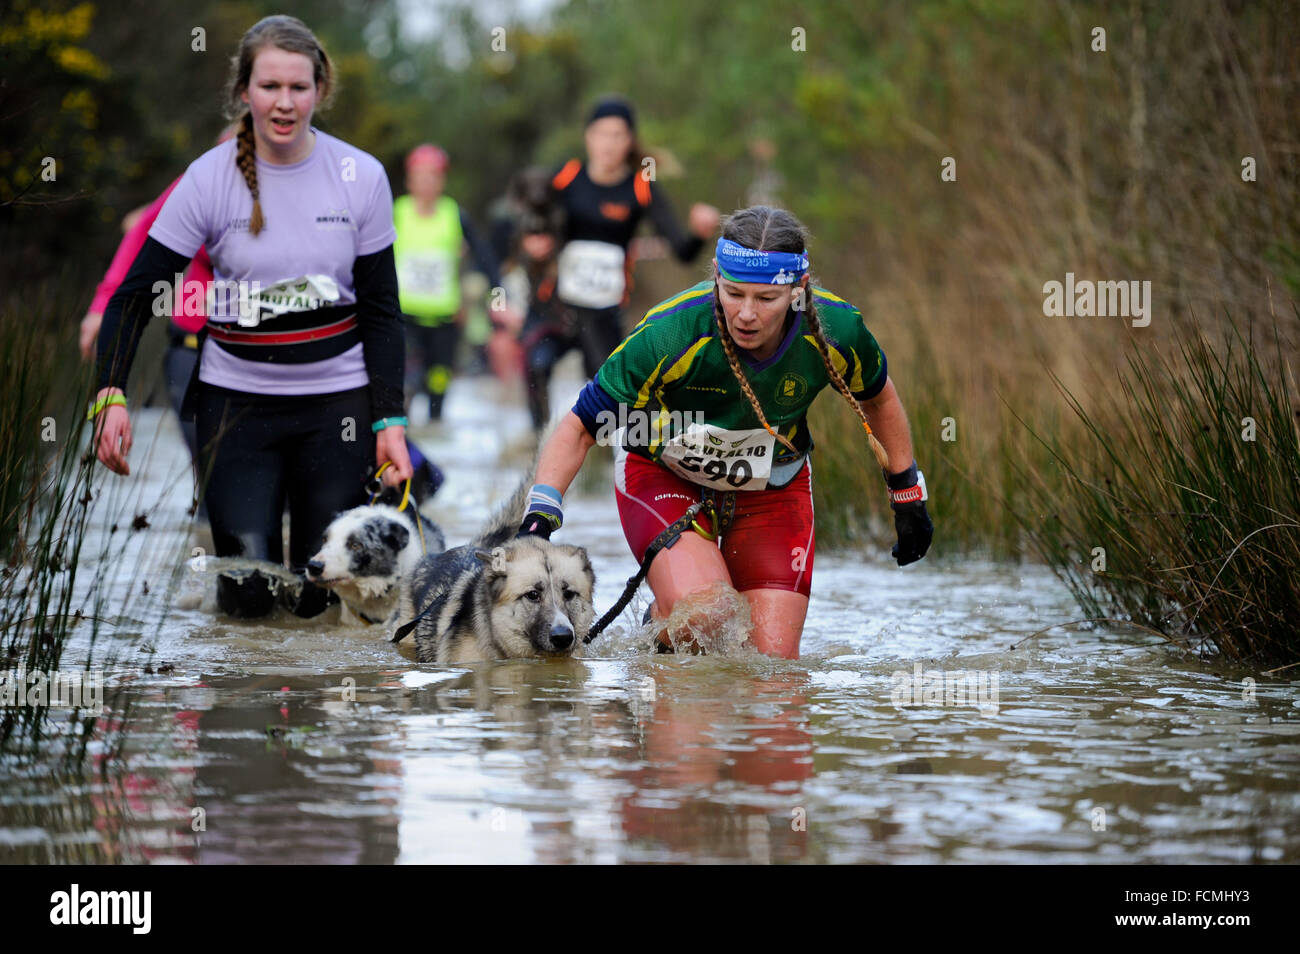 Aldershot, Hants, UK. 23rd January, 2016. Sarah Francis and Dog Oki  struggle through the flooded streams of the Brutal women only  10km canicross race at Long valley Aldershot Hampshire having to break the ice as the make there way around the course .  The recent weather made the Brutal 10km off road course live up to its name as the puddles and streams where up to waste height in many places with early runners having to break the ice as they entered the water.  Credit:  PBWPIX/Alamy Live News Stock Photo